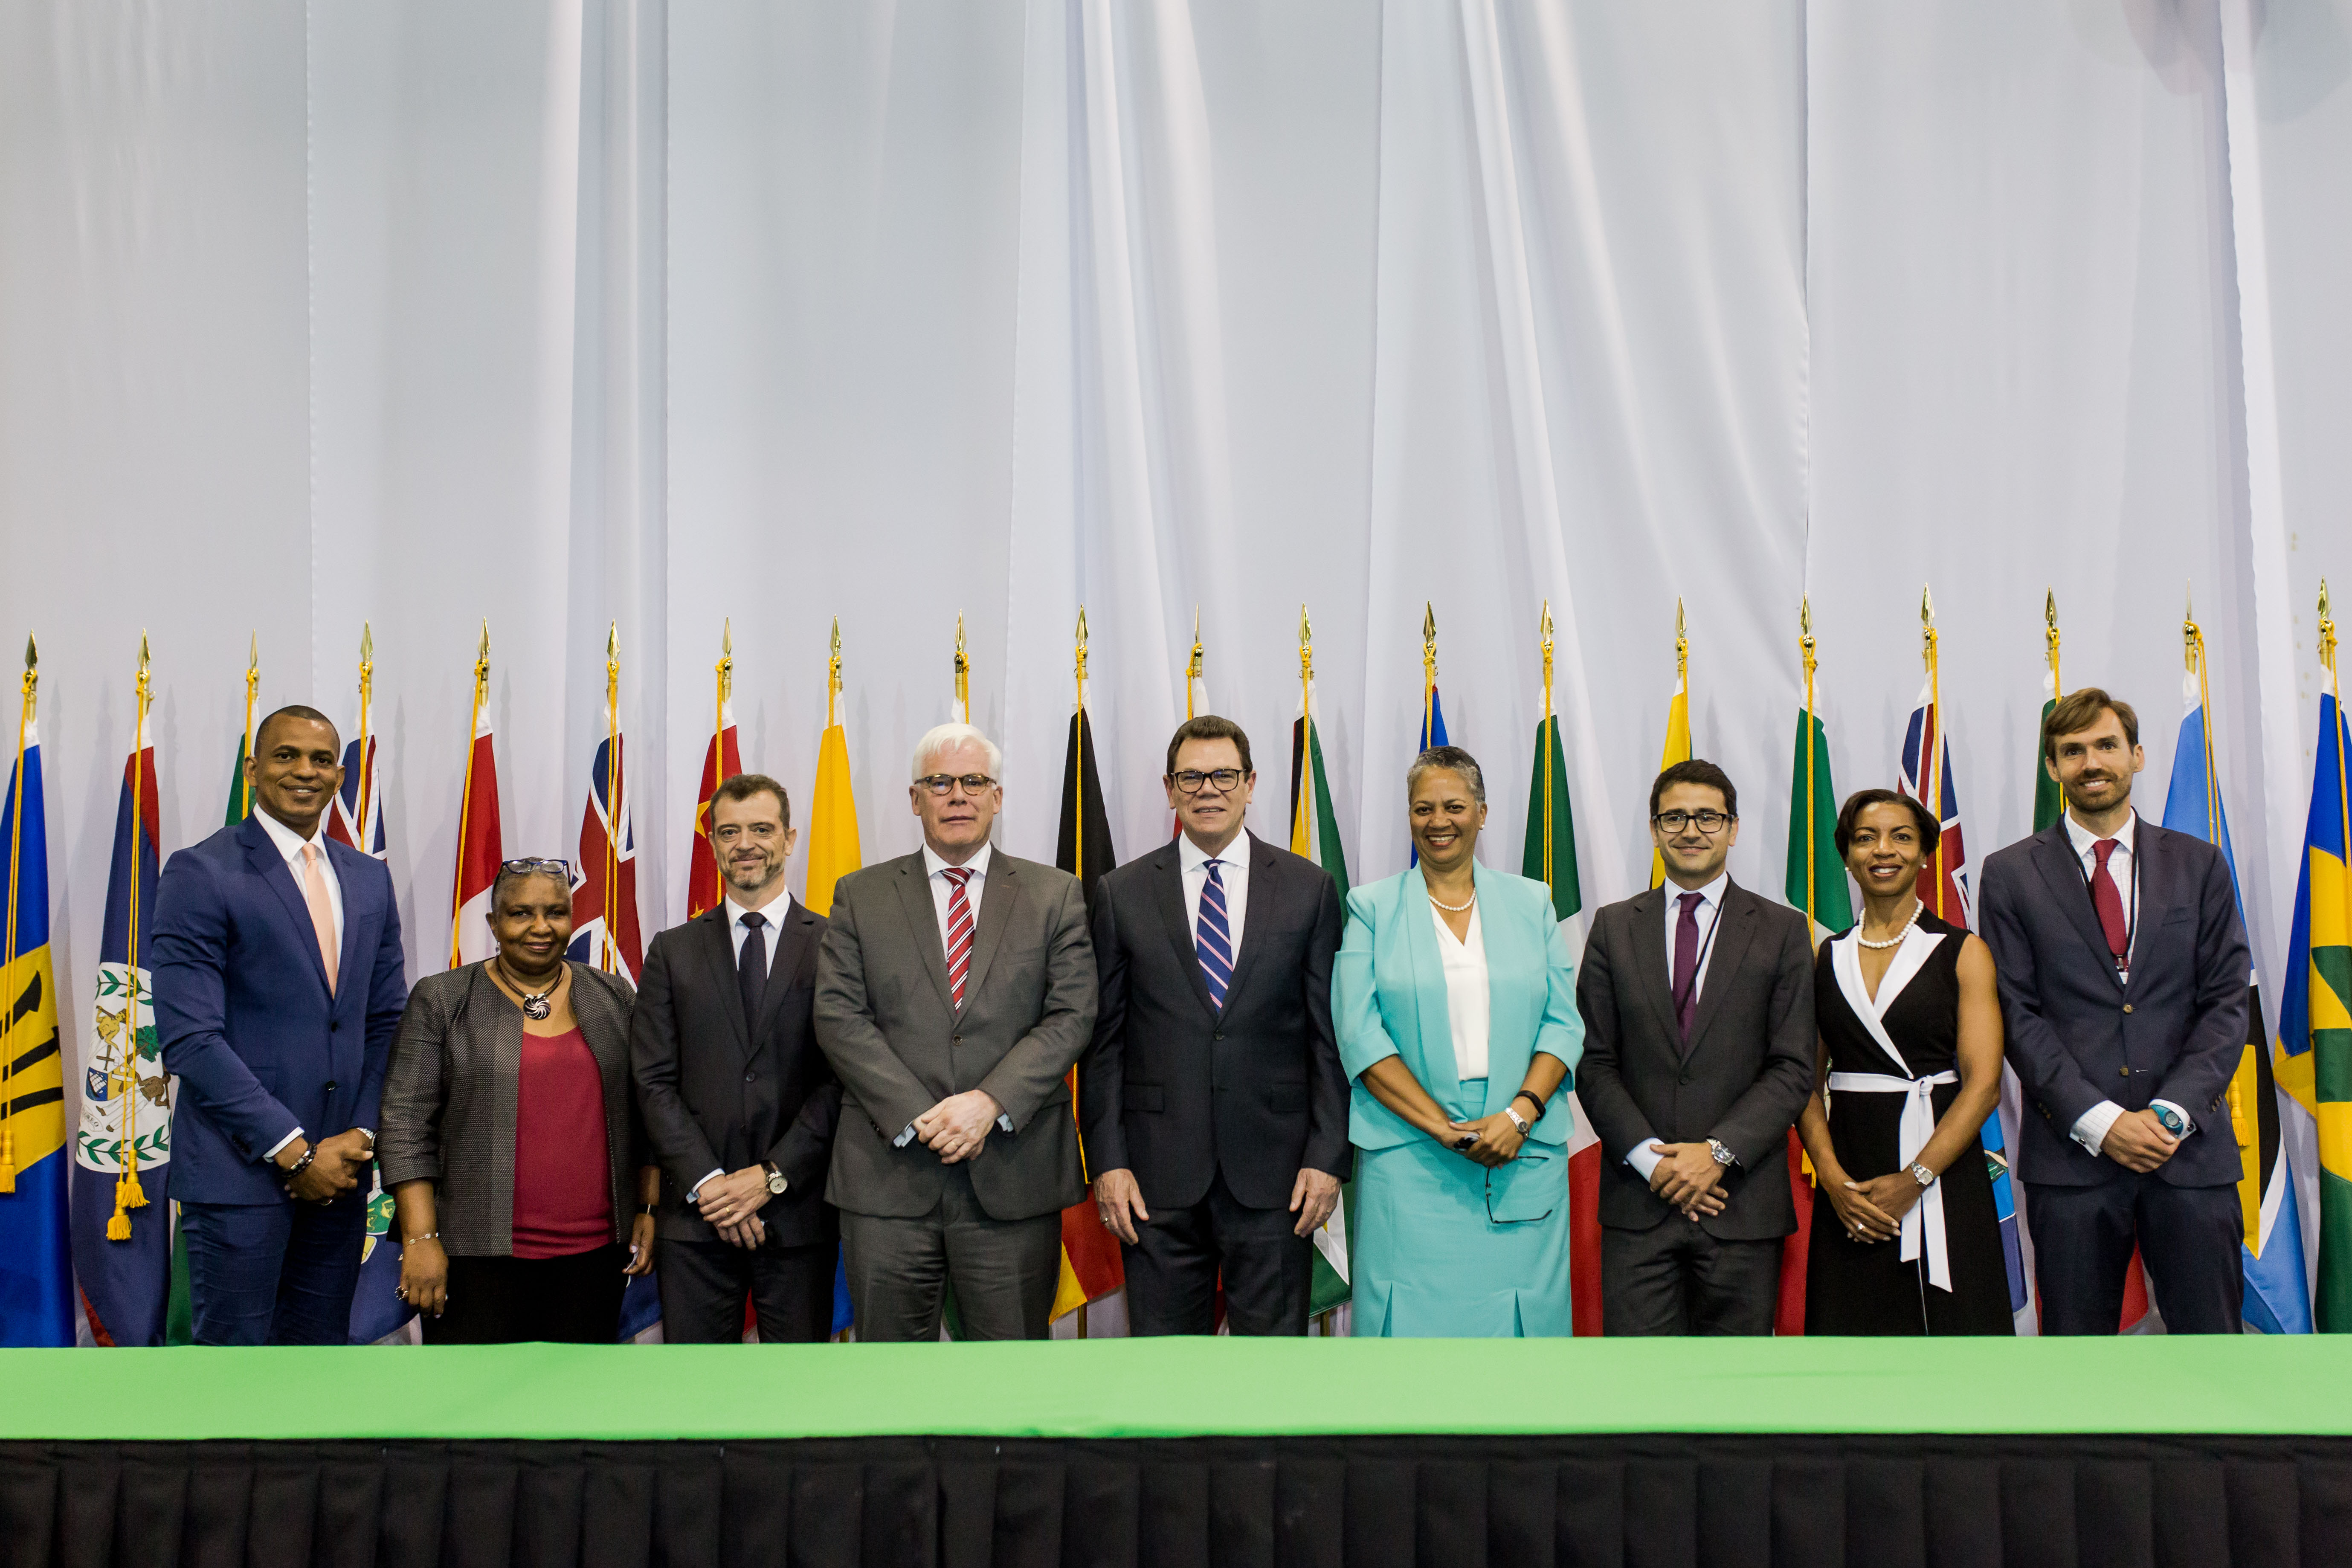 Representatives from CDB and EIB during the signing ceremony for the Climate Action Framework Loan II.